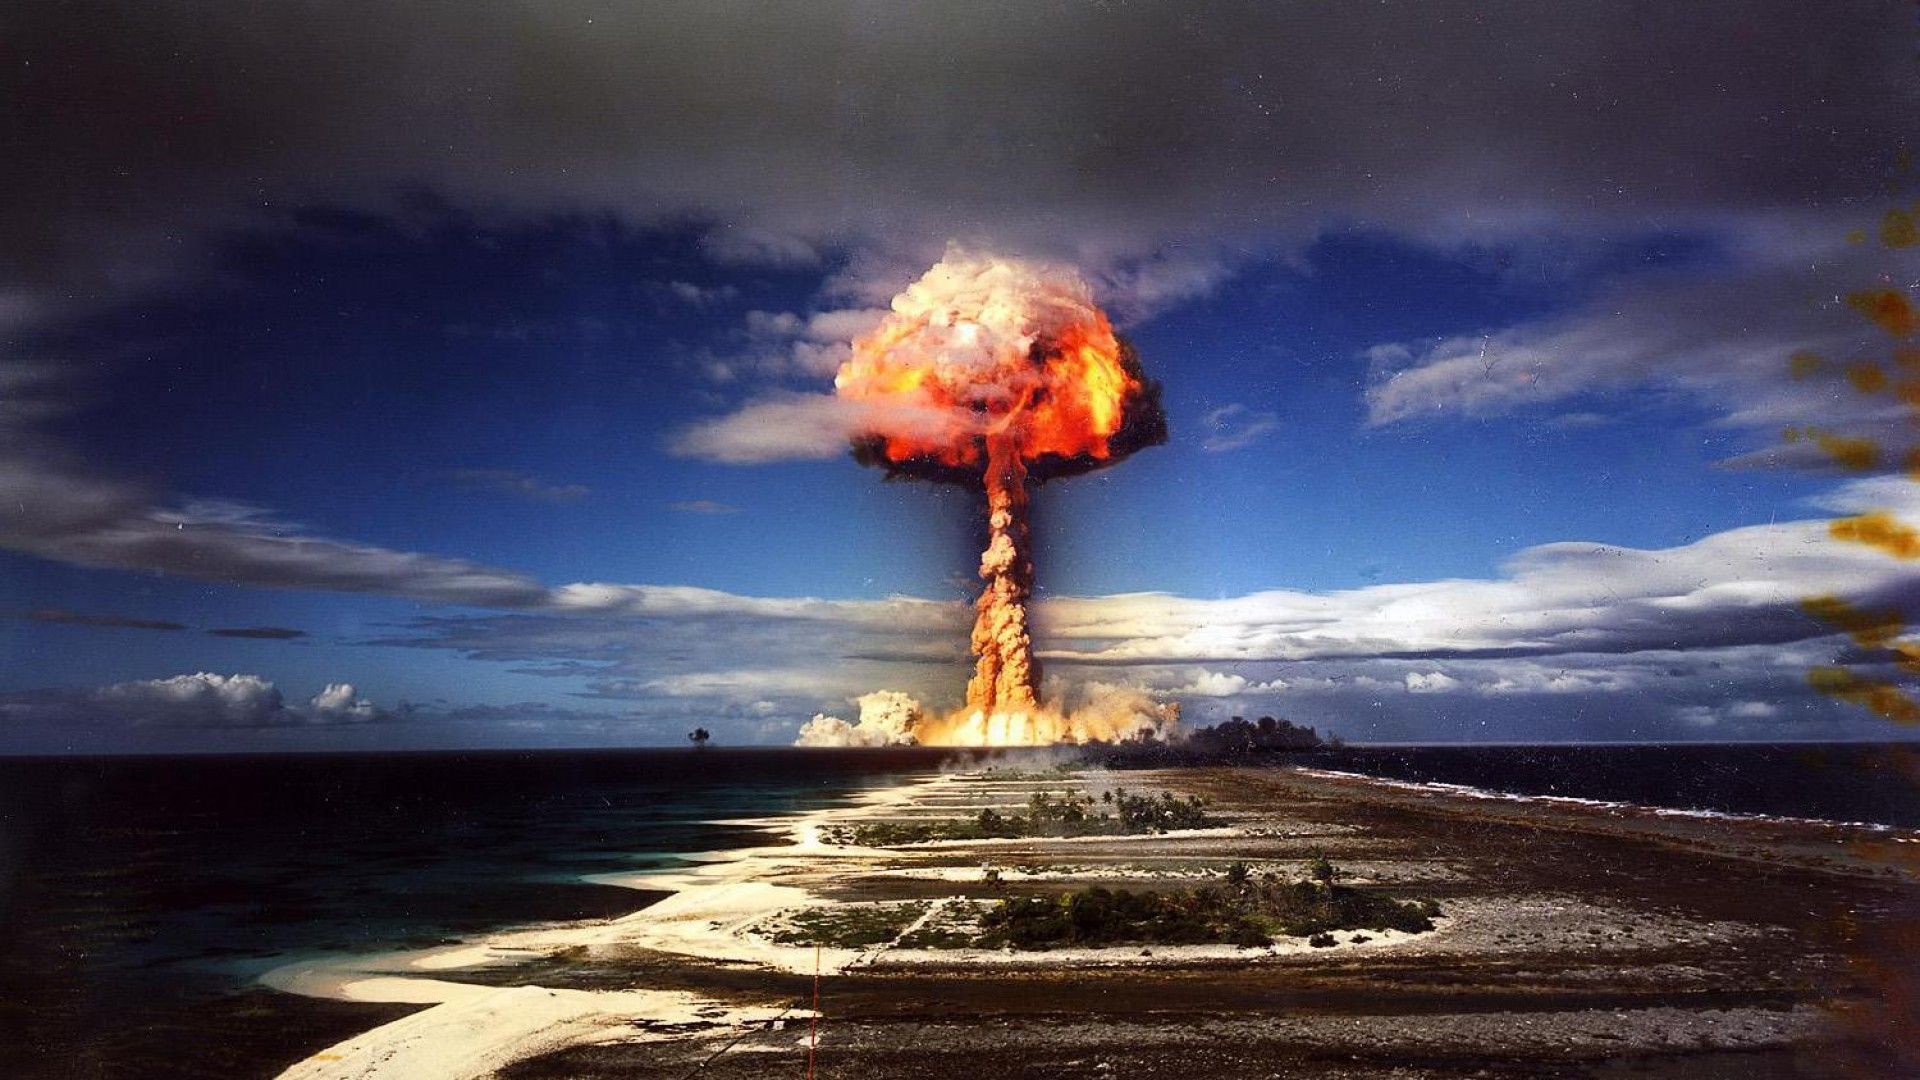 Nuclear Bomb Explosion Wallpaper